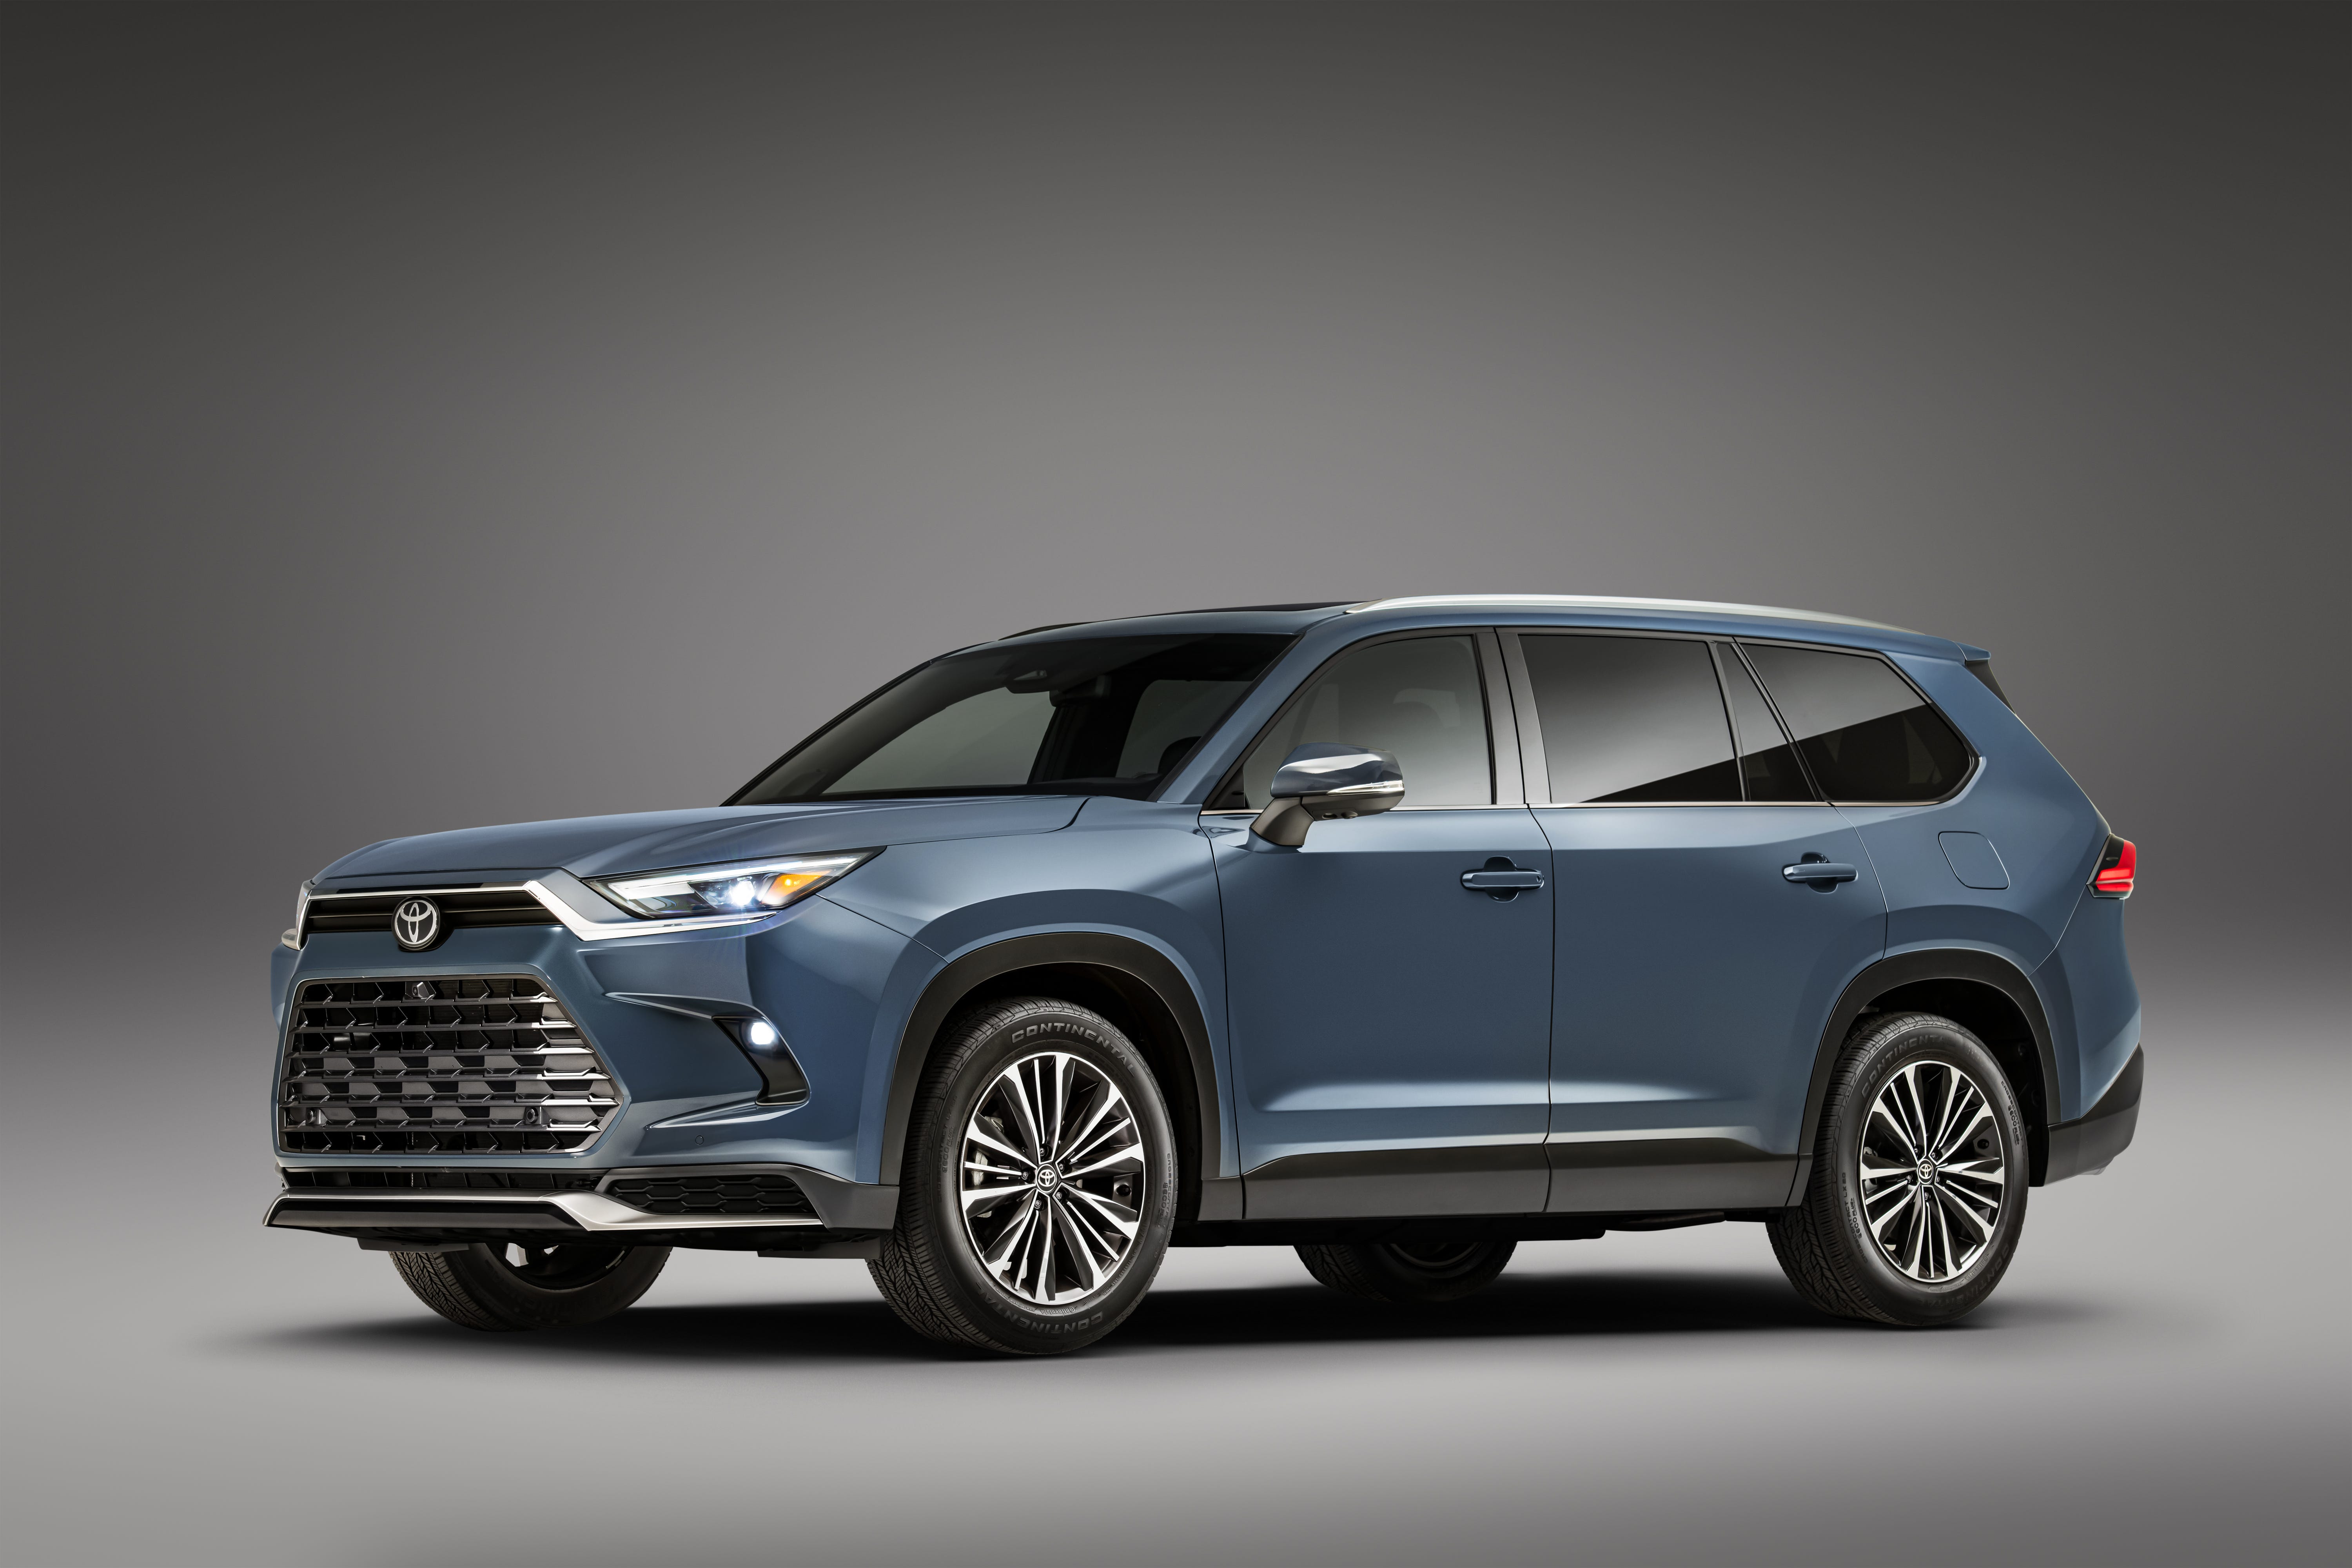 Buying a Toyota SUV Find Out Which Model Is The Best For Your Family   Priority Toyota Hampton Blog